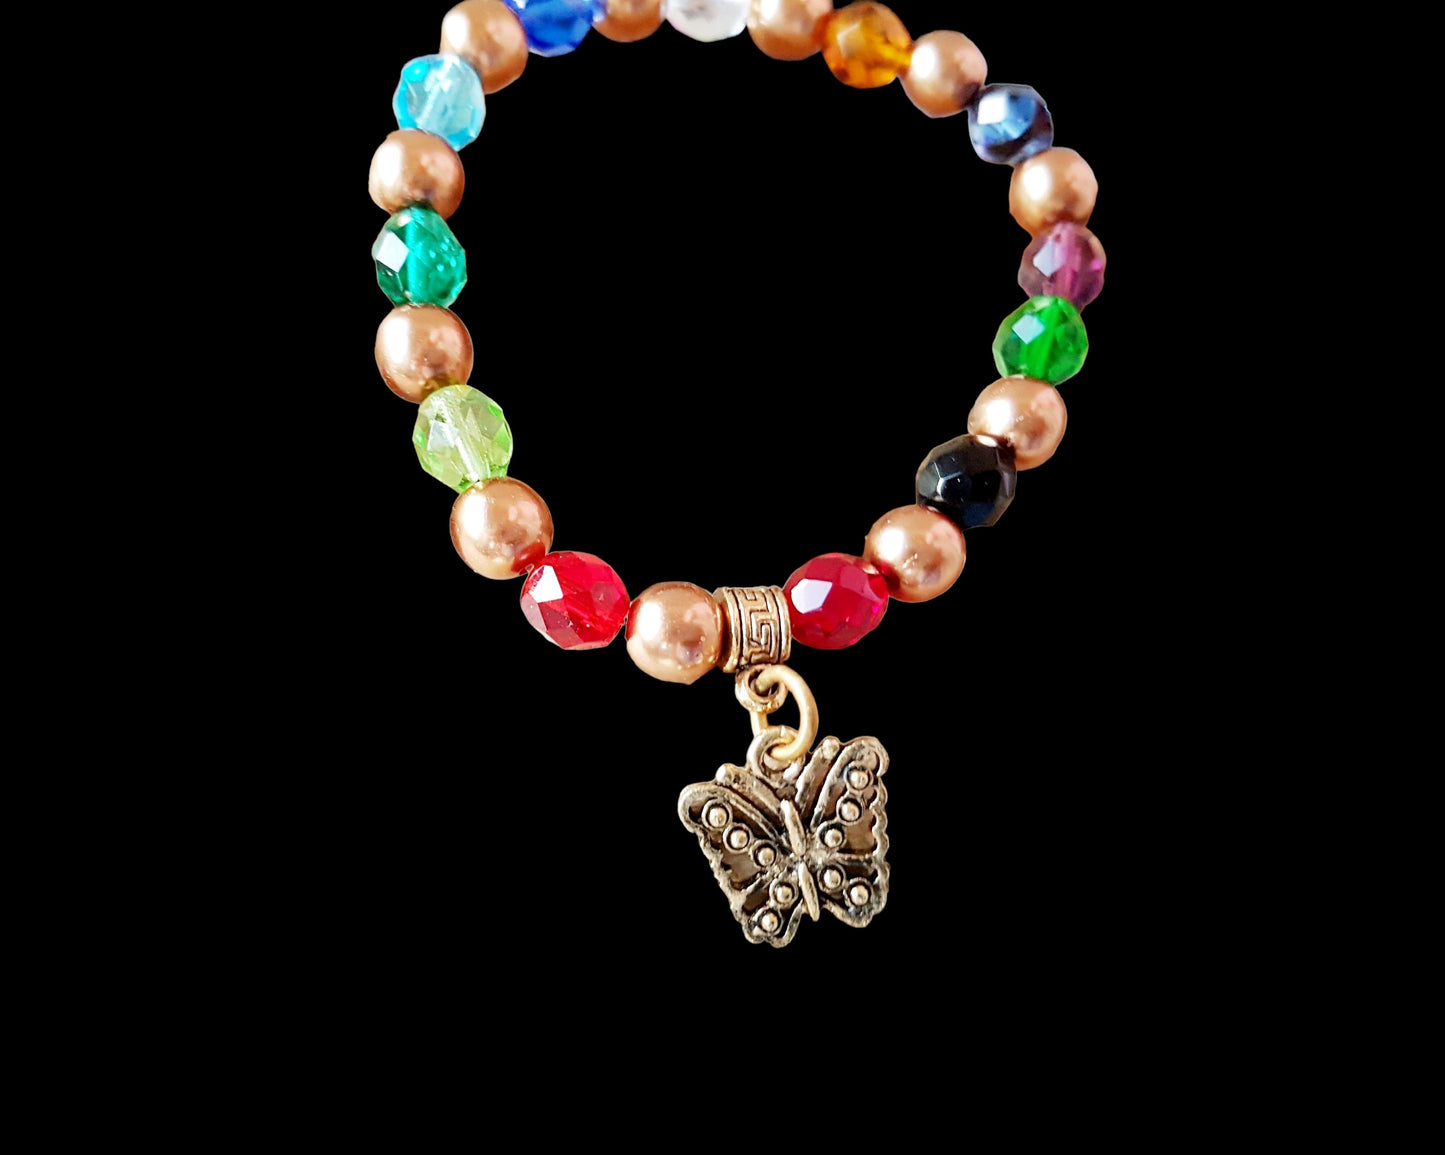 Twelve Stone Butterfly Pearl Bracelet with Twelve Color Glass Stones Inspired by the Breast Plate High Priest Exodus 28, with Gold Pearls and Butterfly Pendant